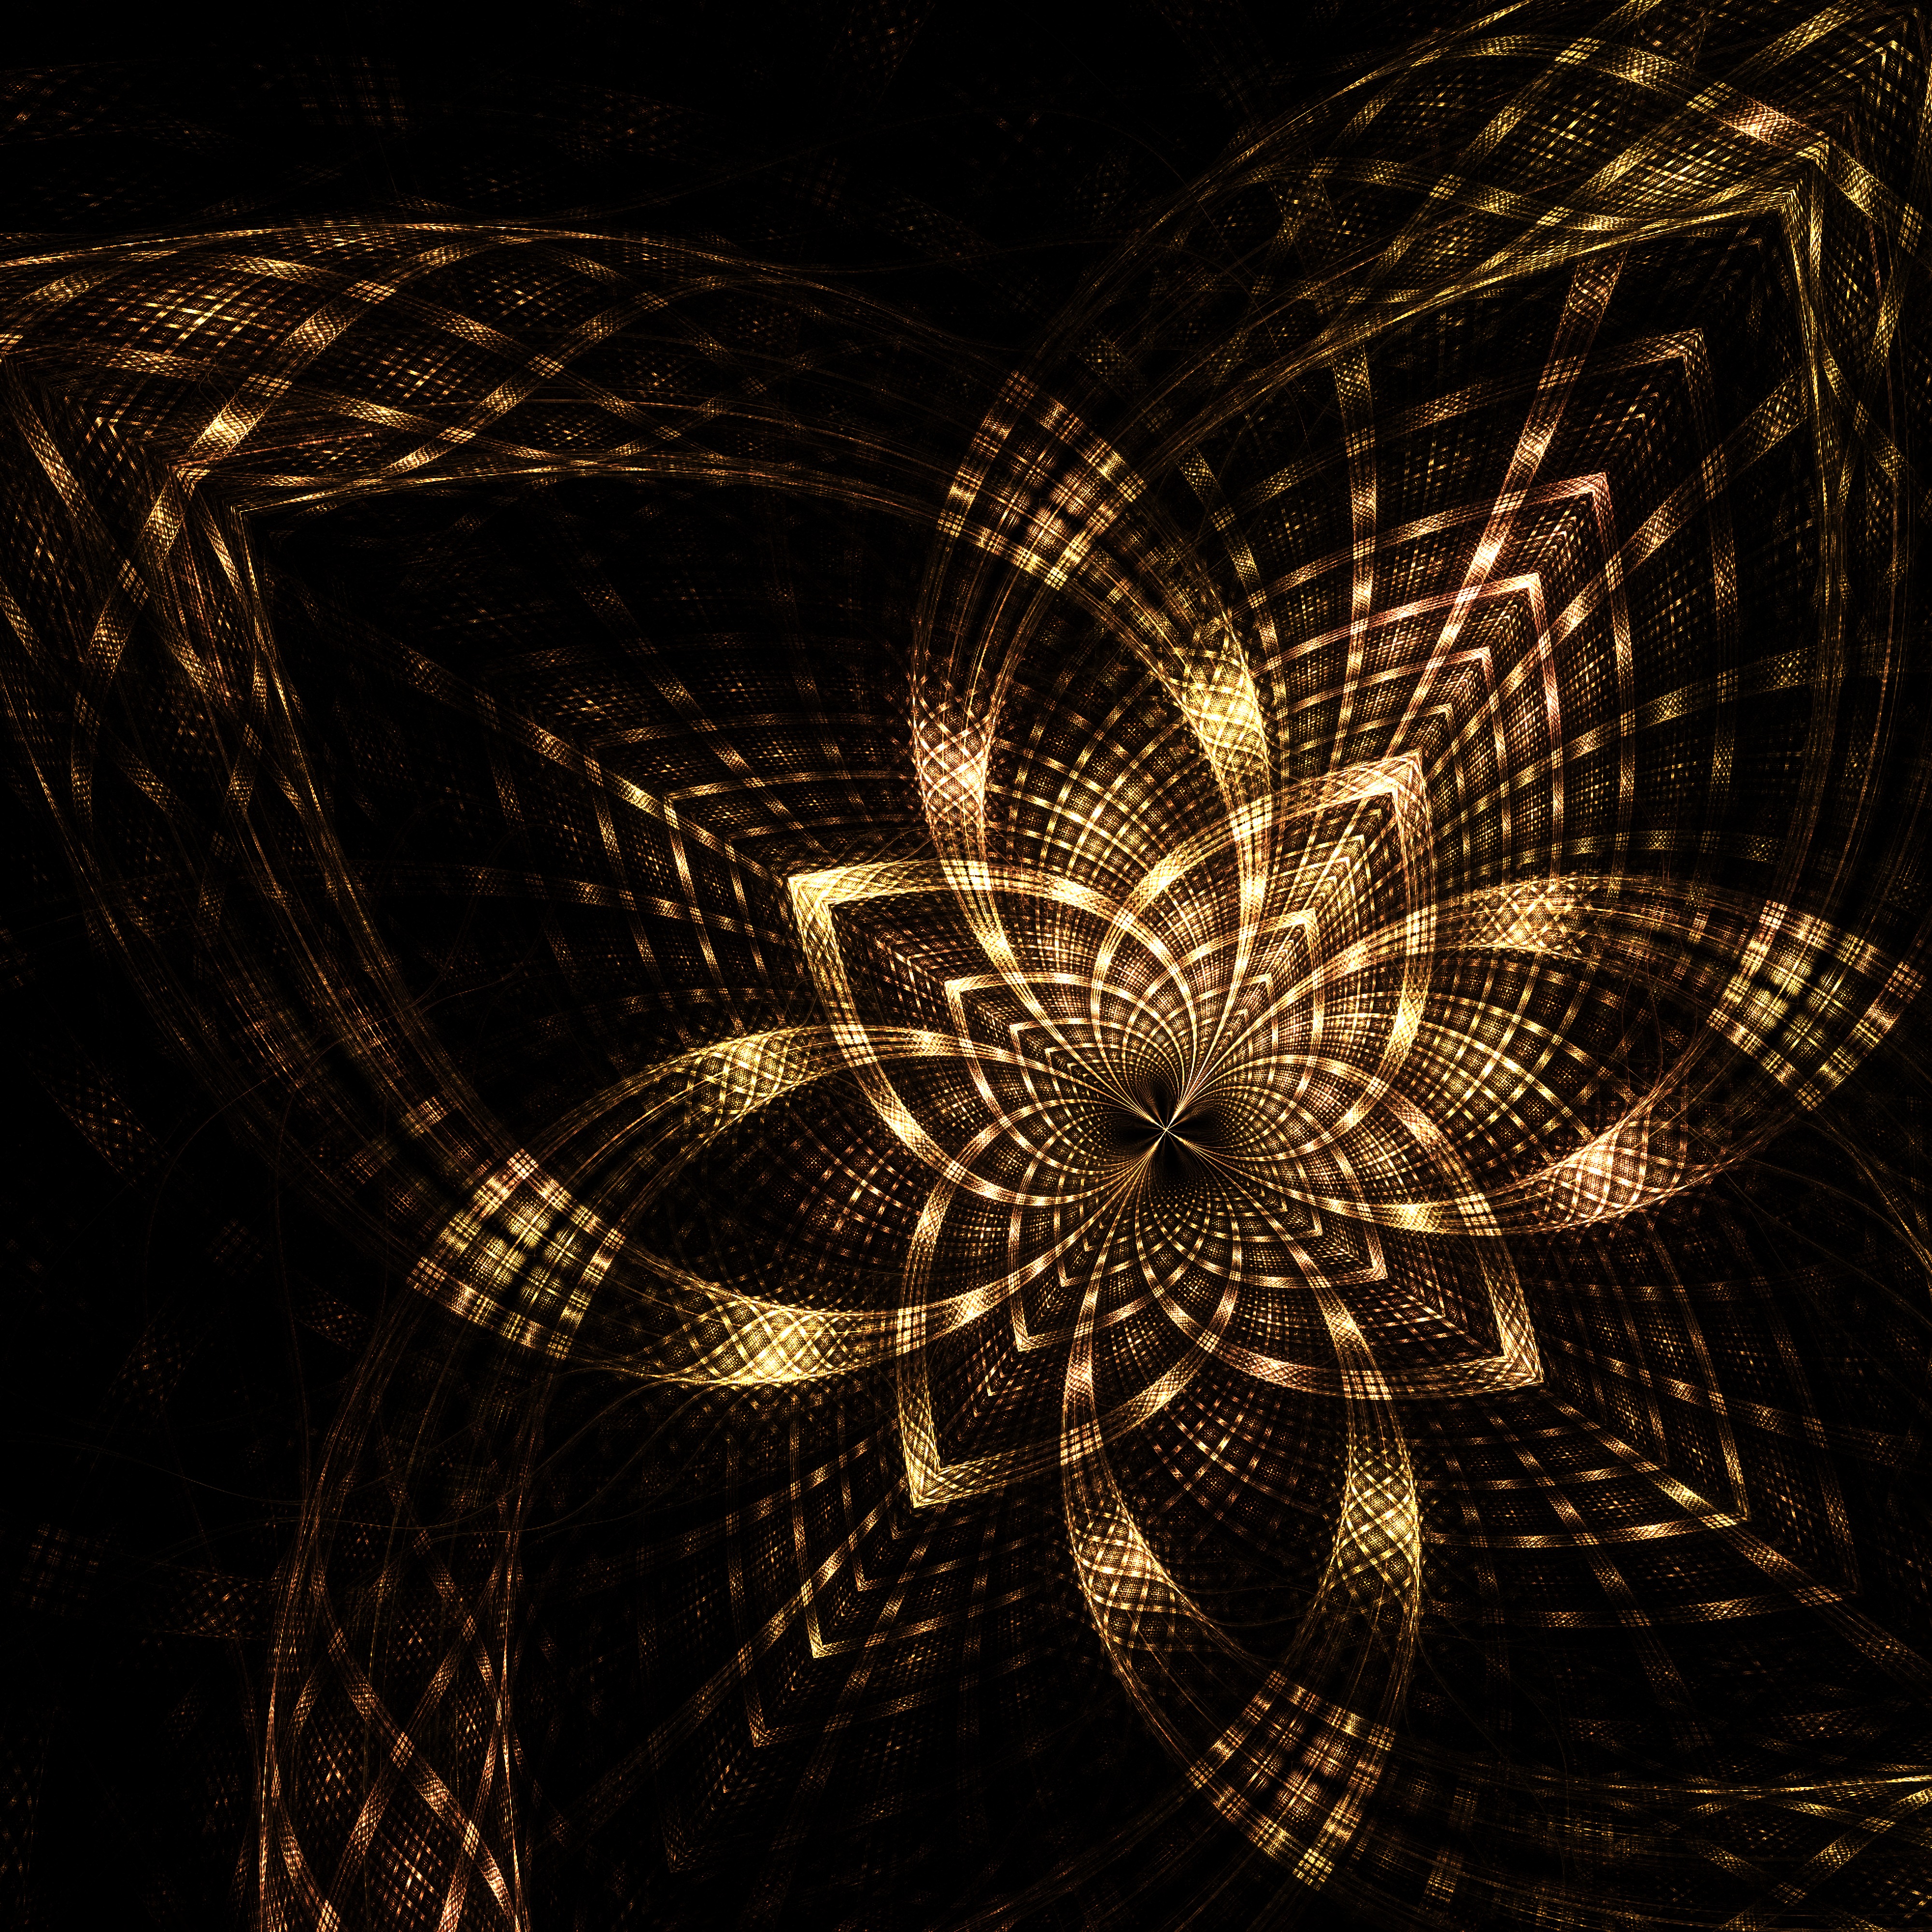 103094 download wallpaper dark, fractal, lines, abstract, glow, diffusion, dispersion screensavers and pictures for free